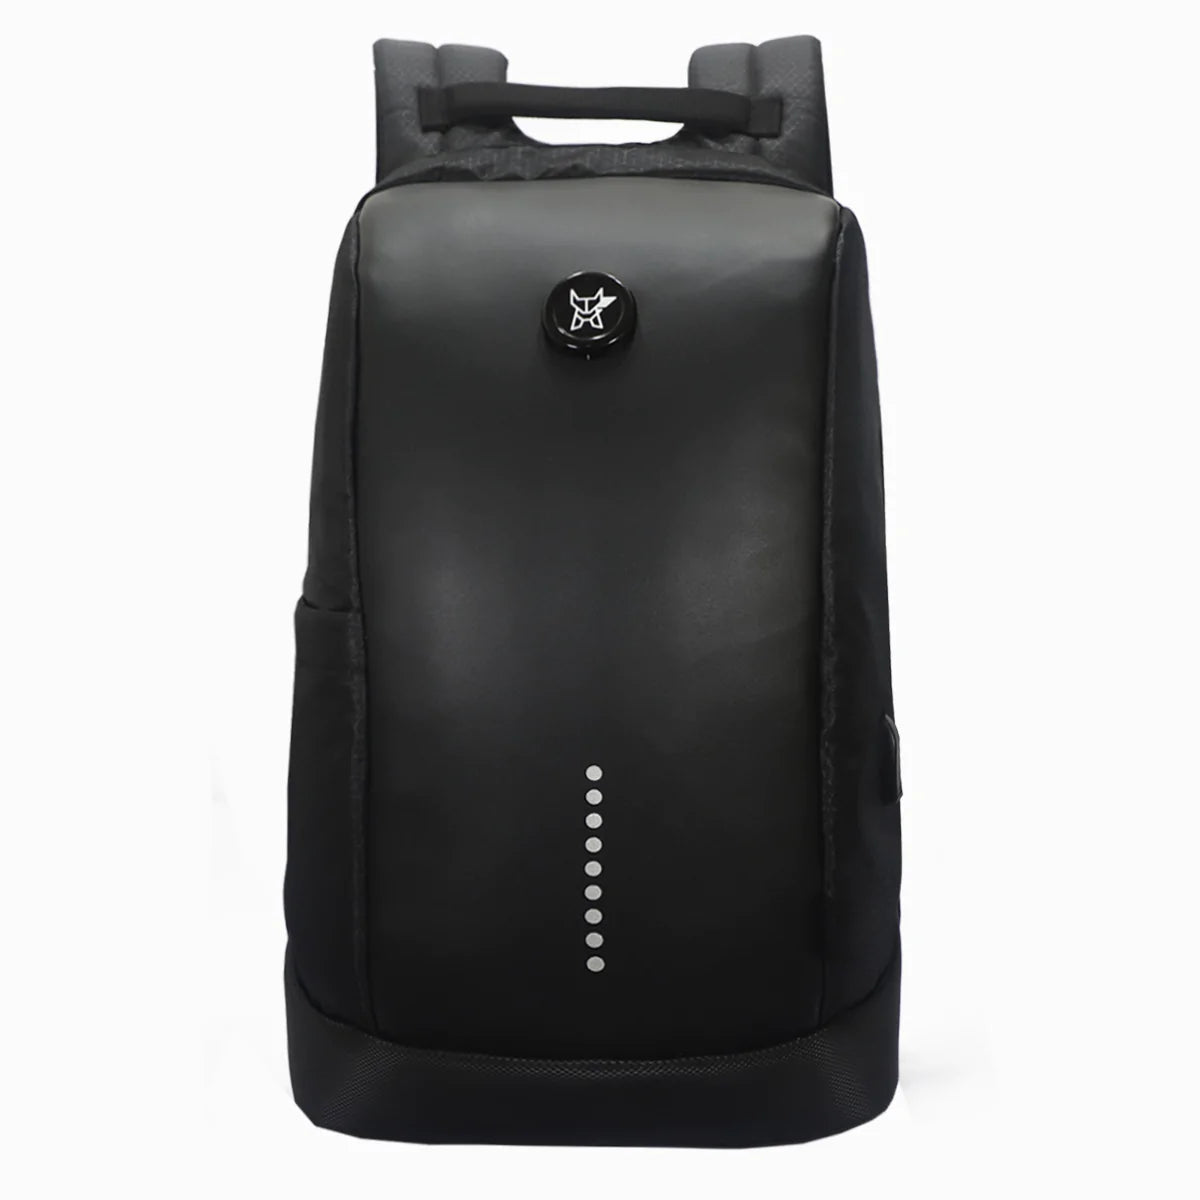 Arctic Fox Slope Backpack